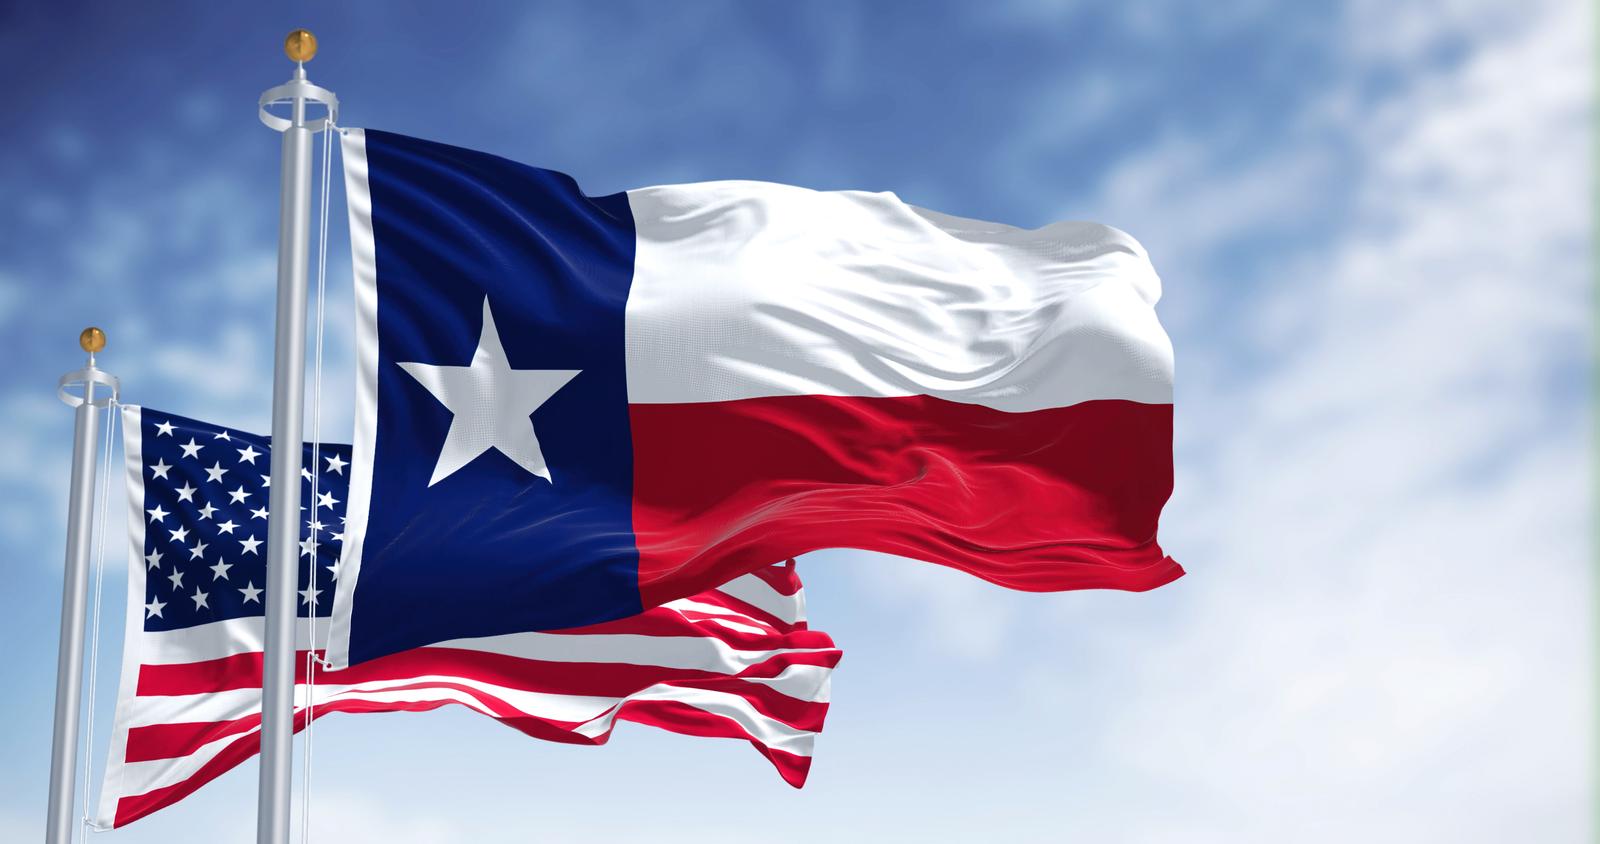 The Texas state flag waving along with the national flag of the United States of America. Texas s a state in the South Central region of the United States